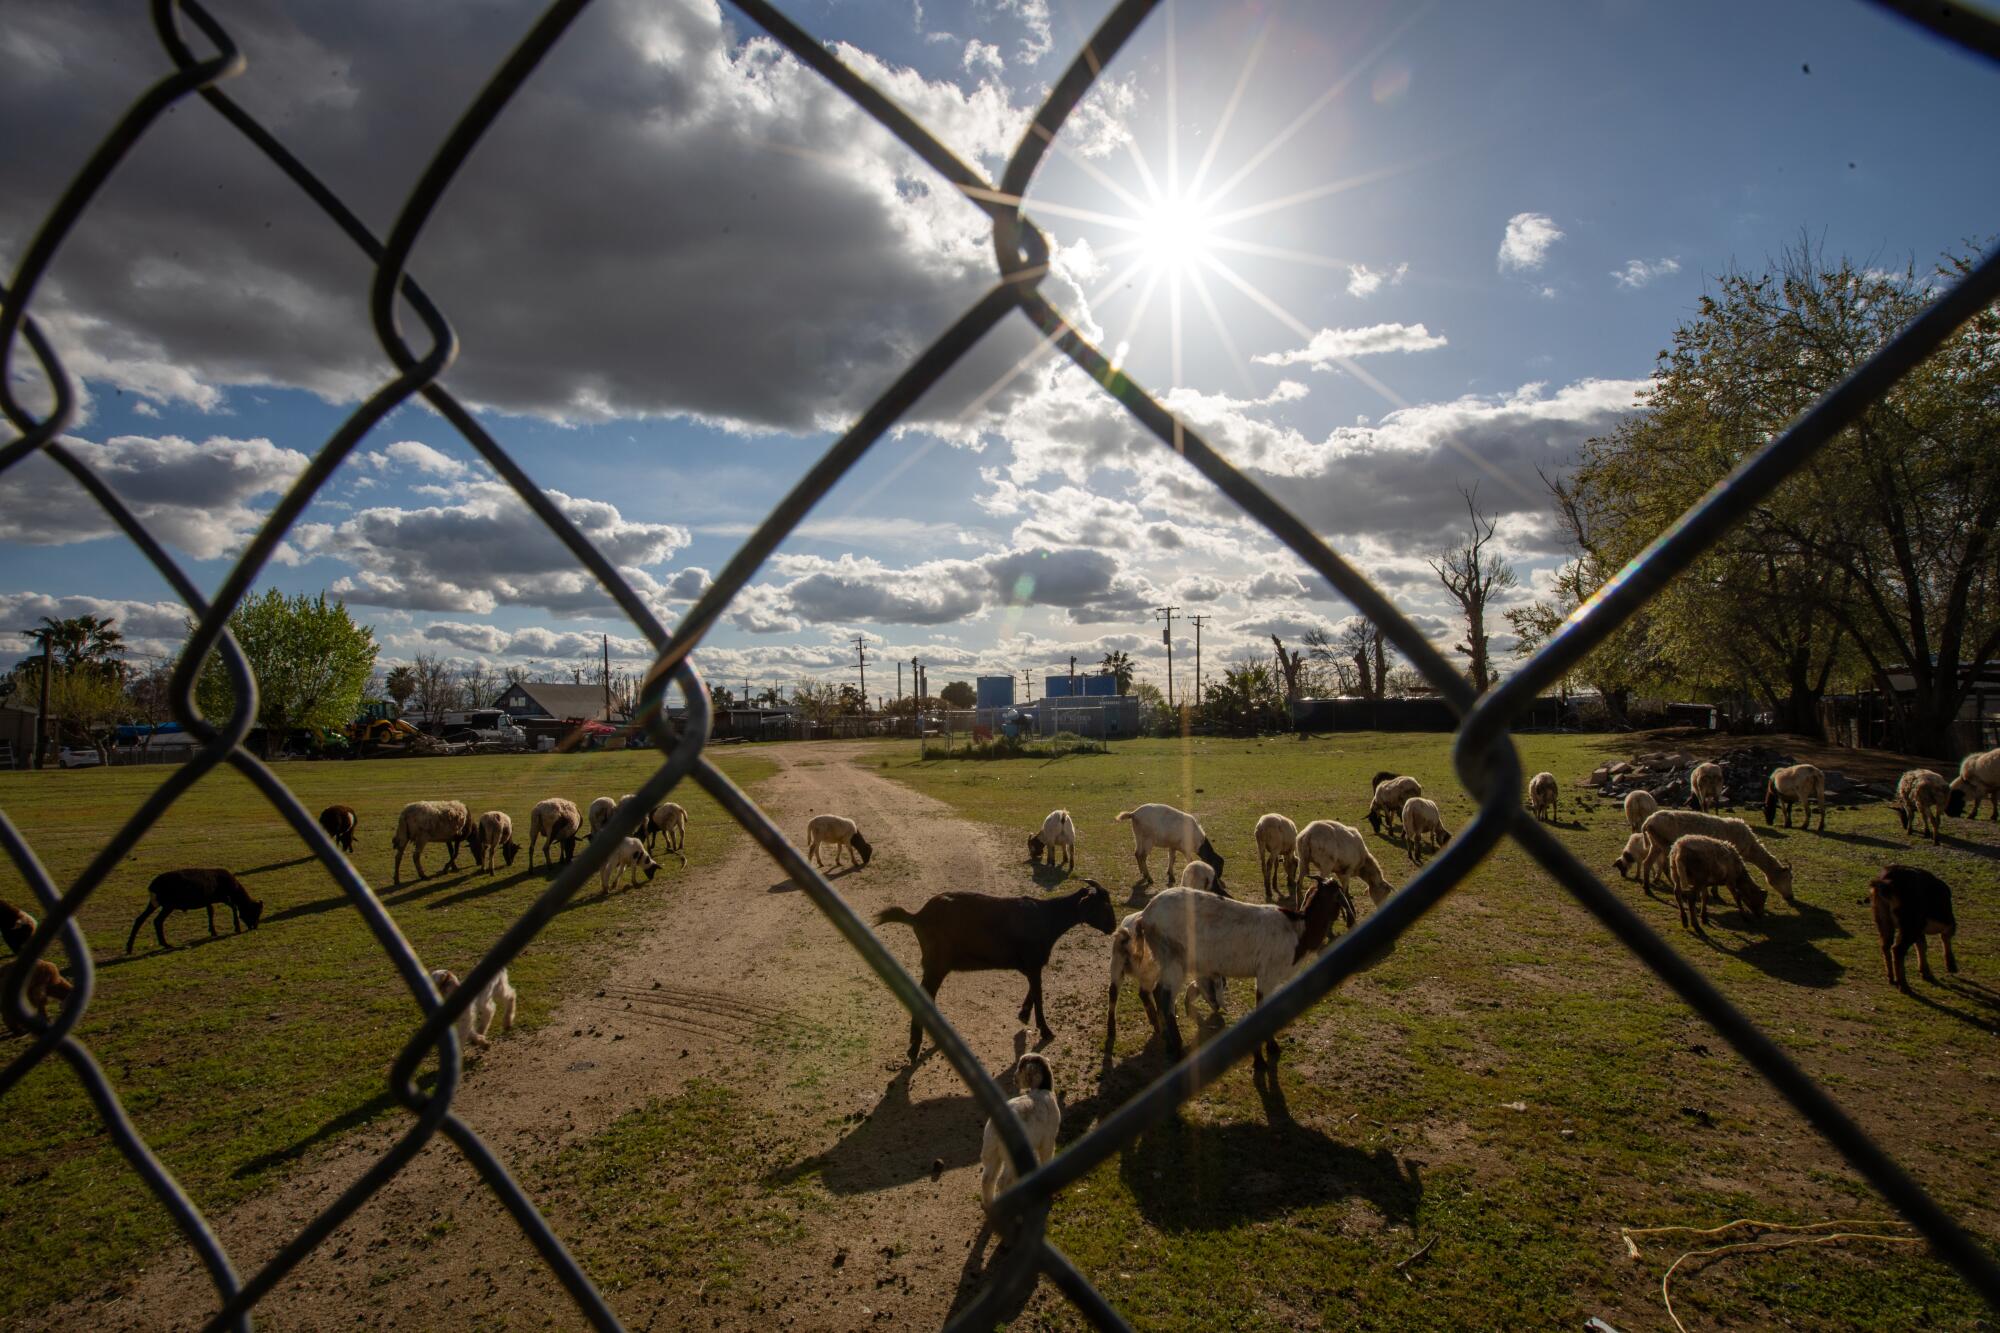 Goats graze on a grassy lawn behind a chain link fence.  